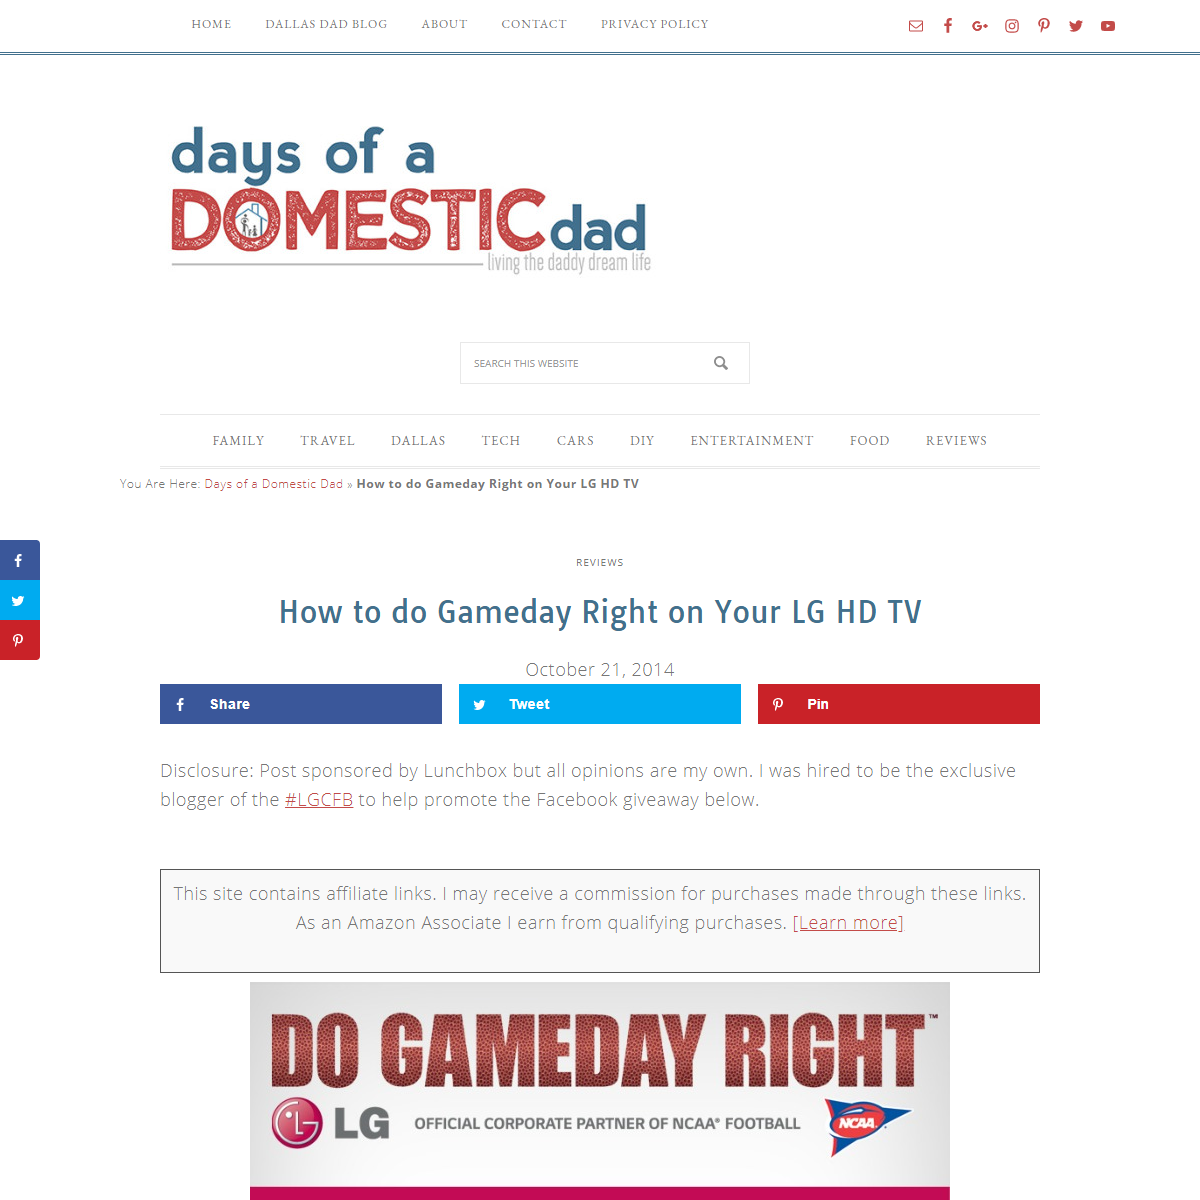 A complete backup of https://daysofadomesticdad.com/how-to-do-gameday-right/